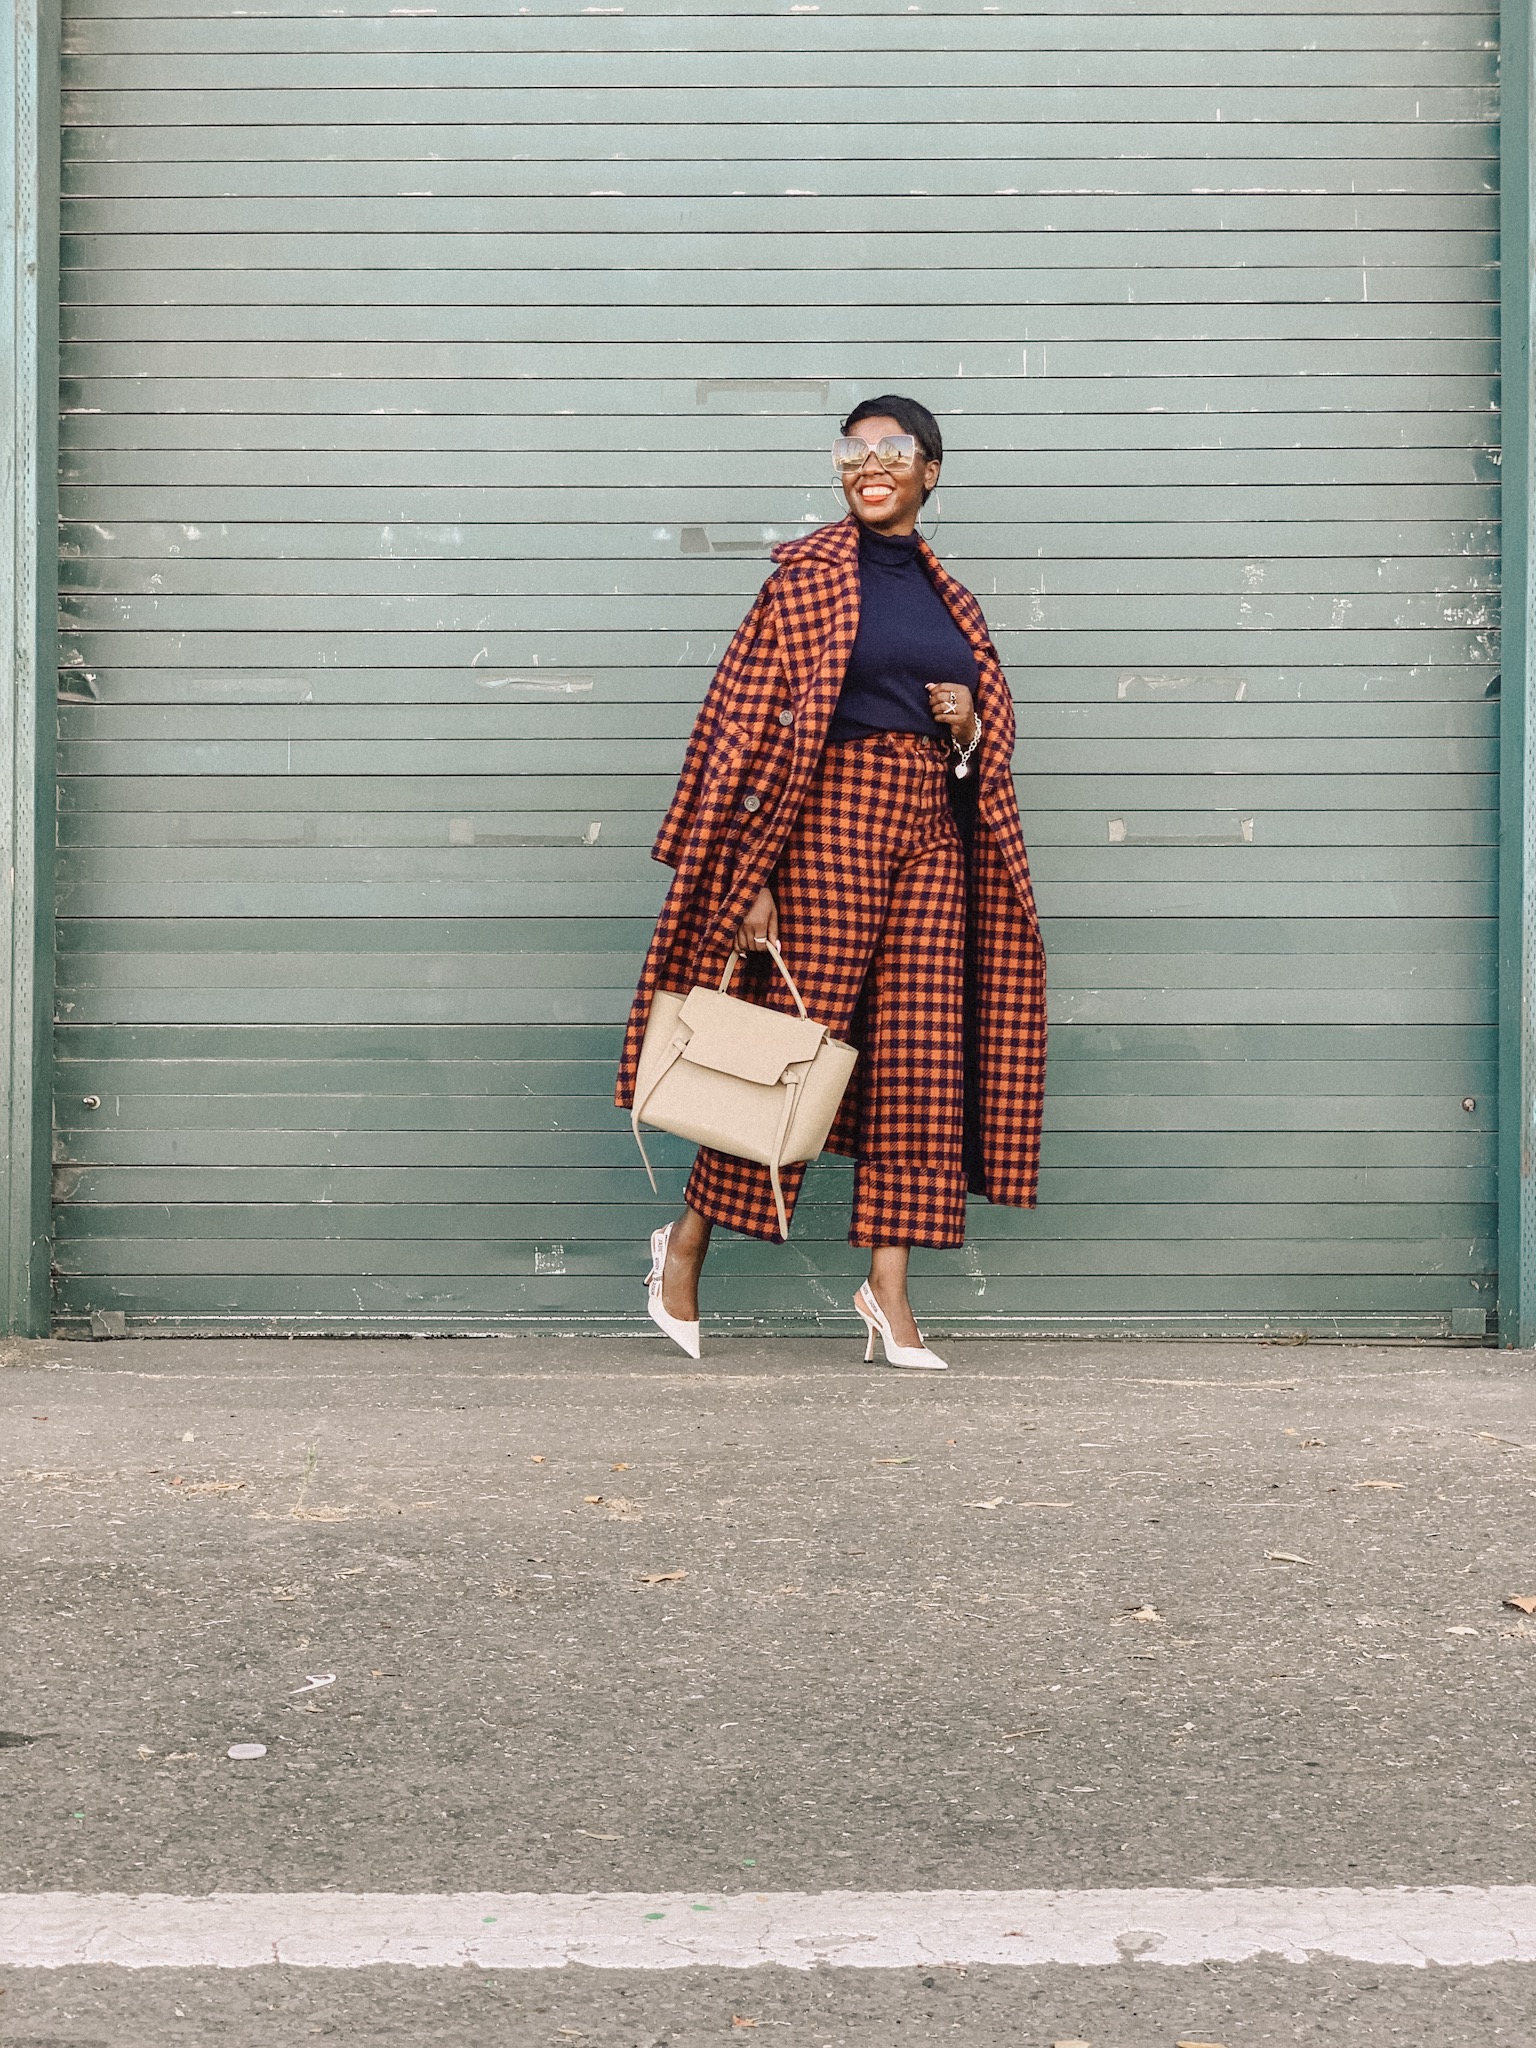 San Francisco Style Blogger Amber Richele Of The Cocoa Butter Diaries Shares Her Interpretation Of The Fall Suit To Celebrate The First Official Day Of Fall